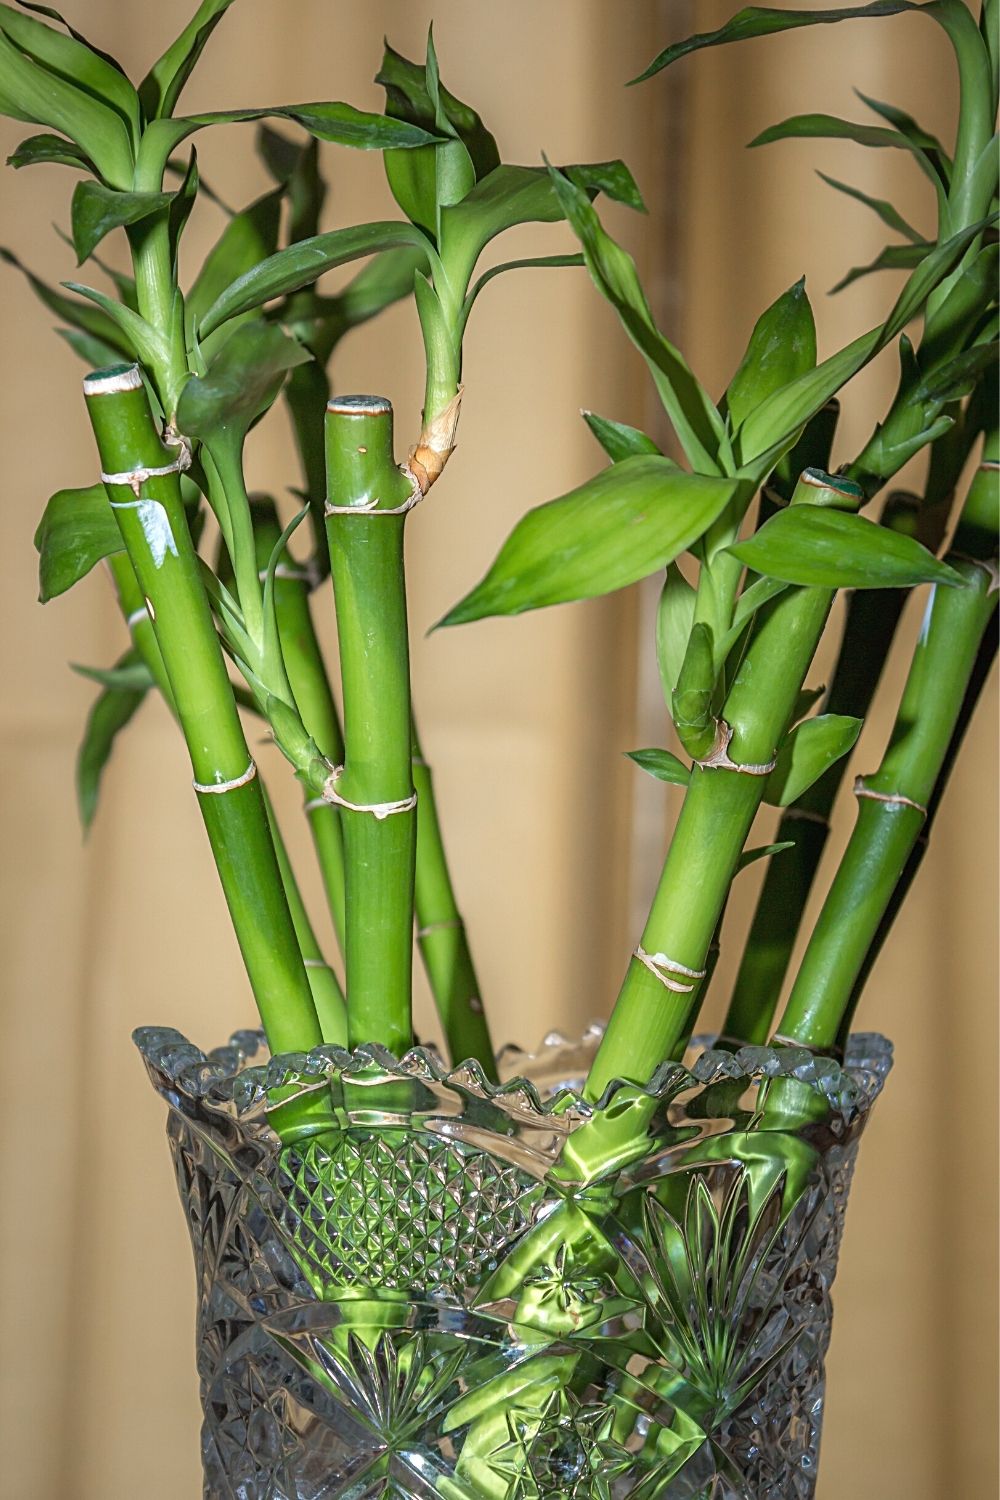 Bamboo Plant offers protection to baby fish like betta fish